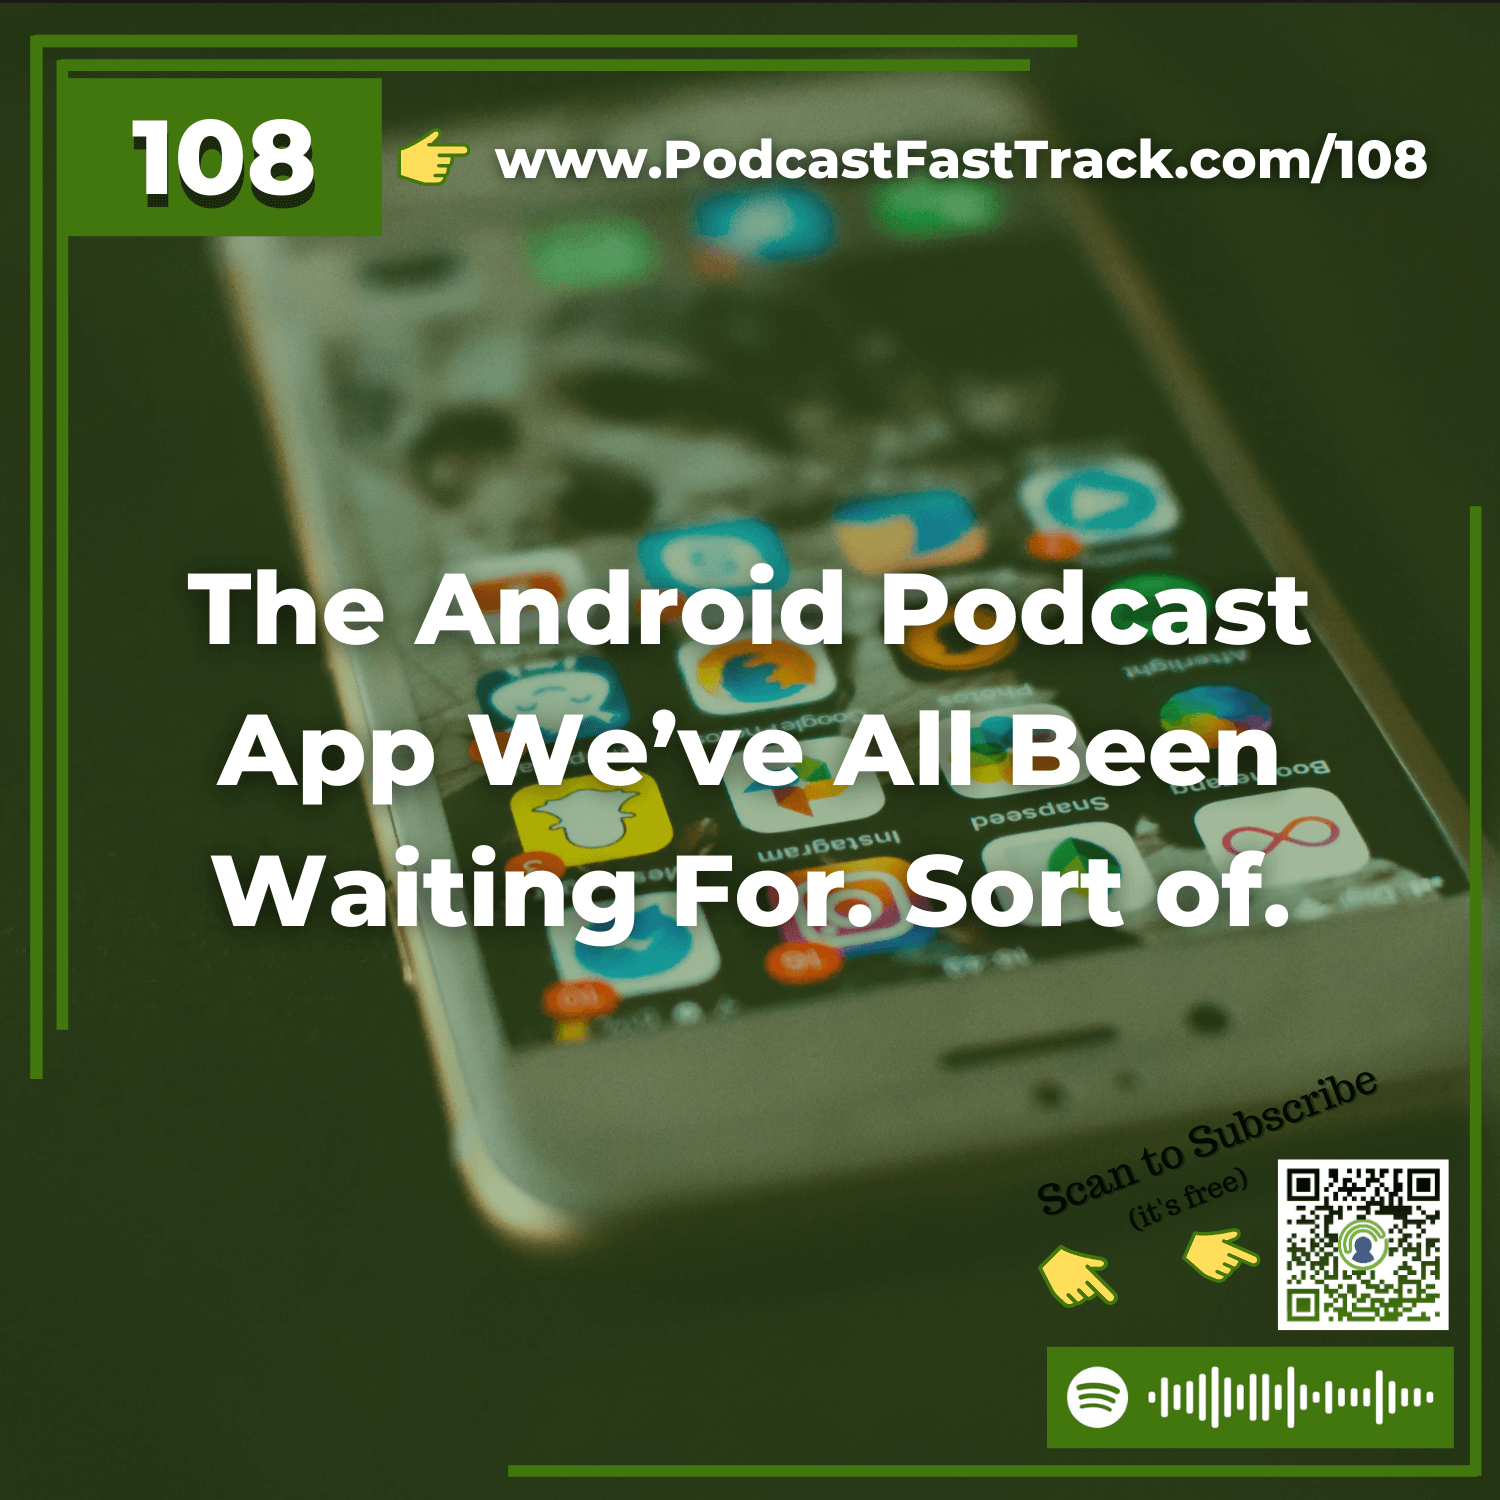 108: The Android Podcast App We’ve All Been Waiting For. Sort of.